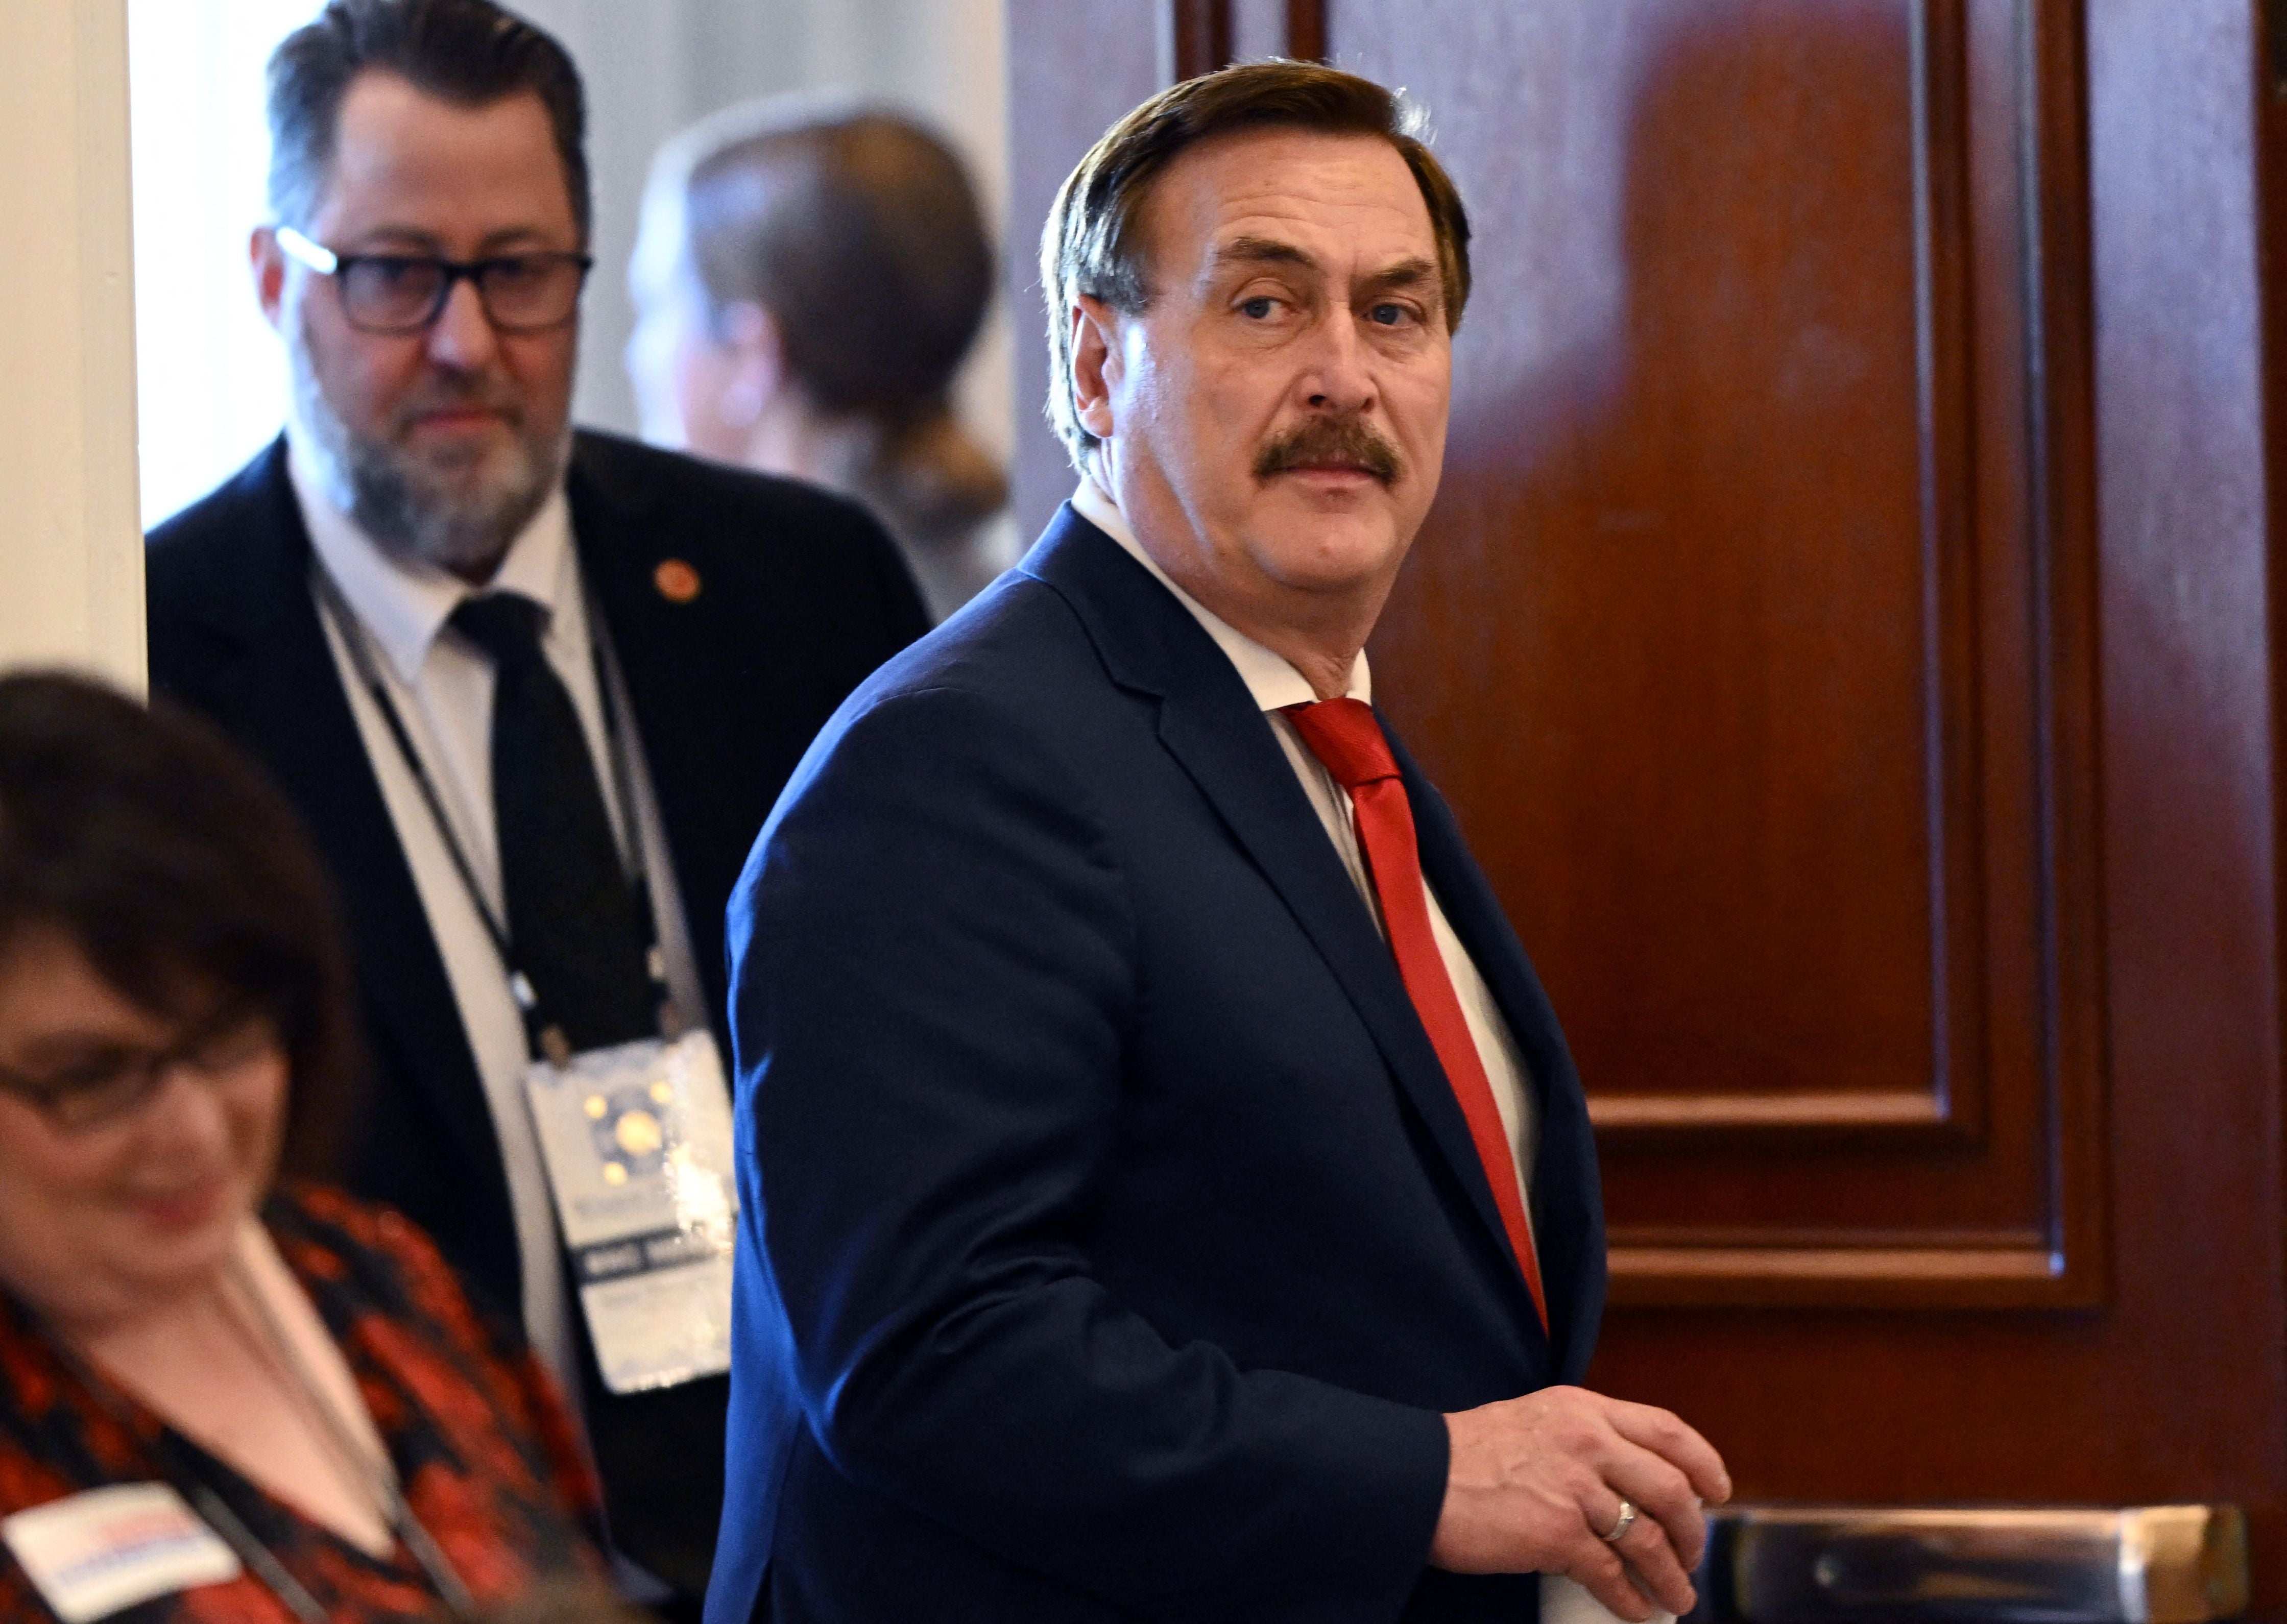 Mike Lindell has continued to spread false claims about Dominion while being sued for $1.3bn